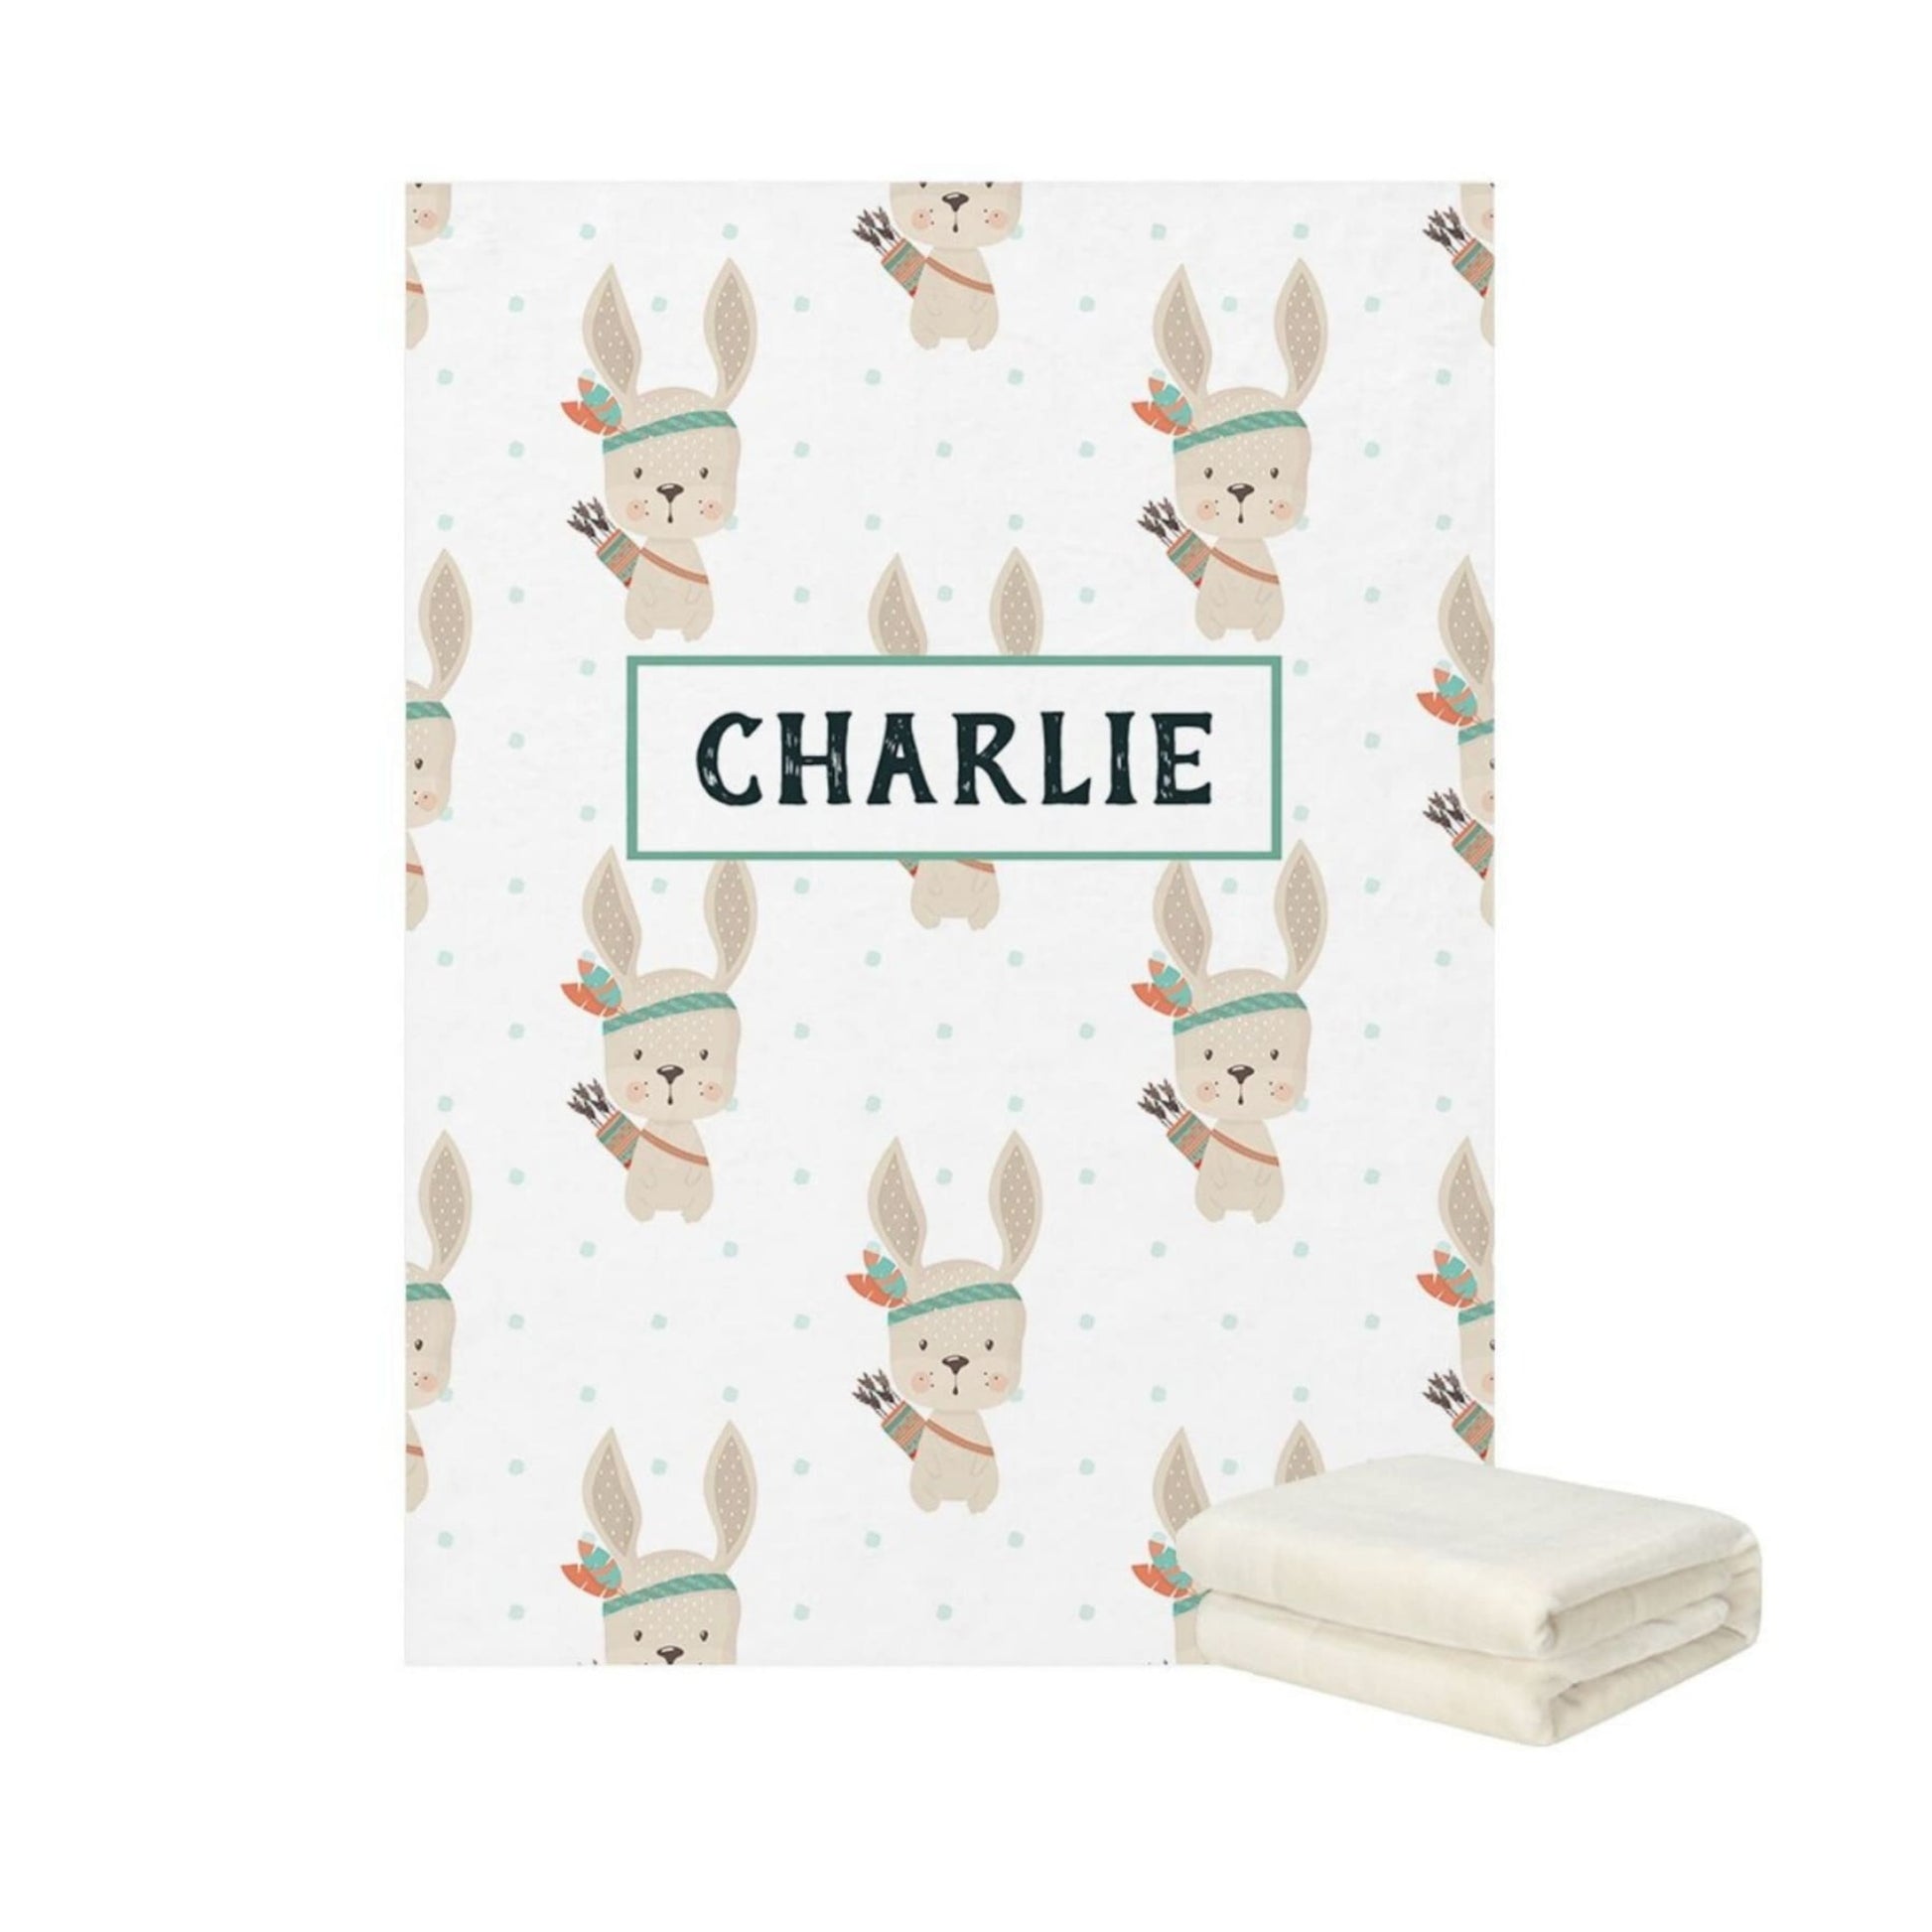 Personalized Baby Fleece Blanket with bunny graphic and name | Hunny Bubba Kids - Baby 